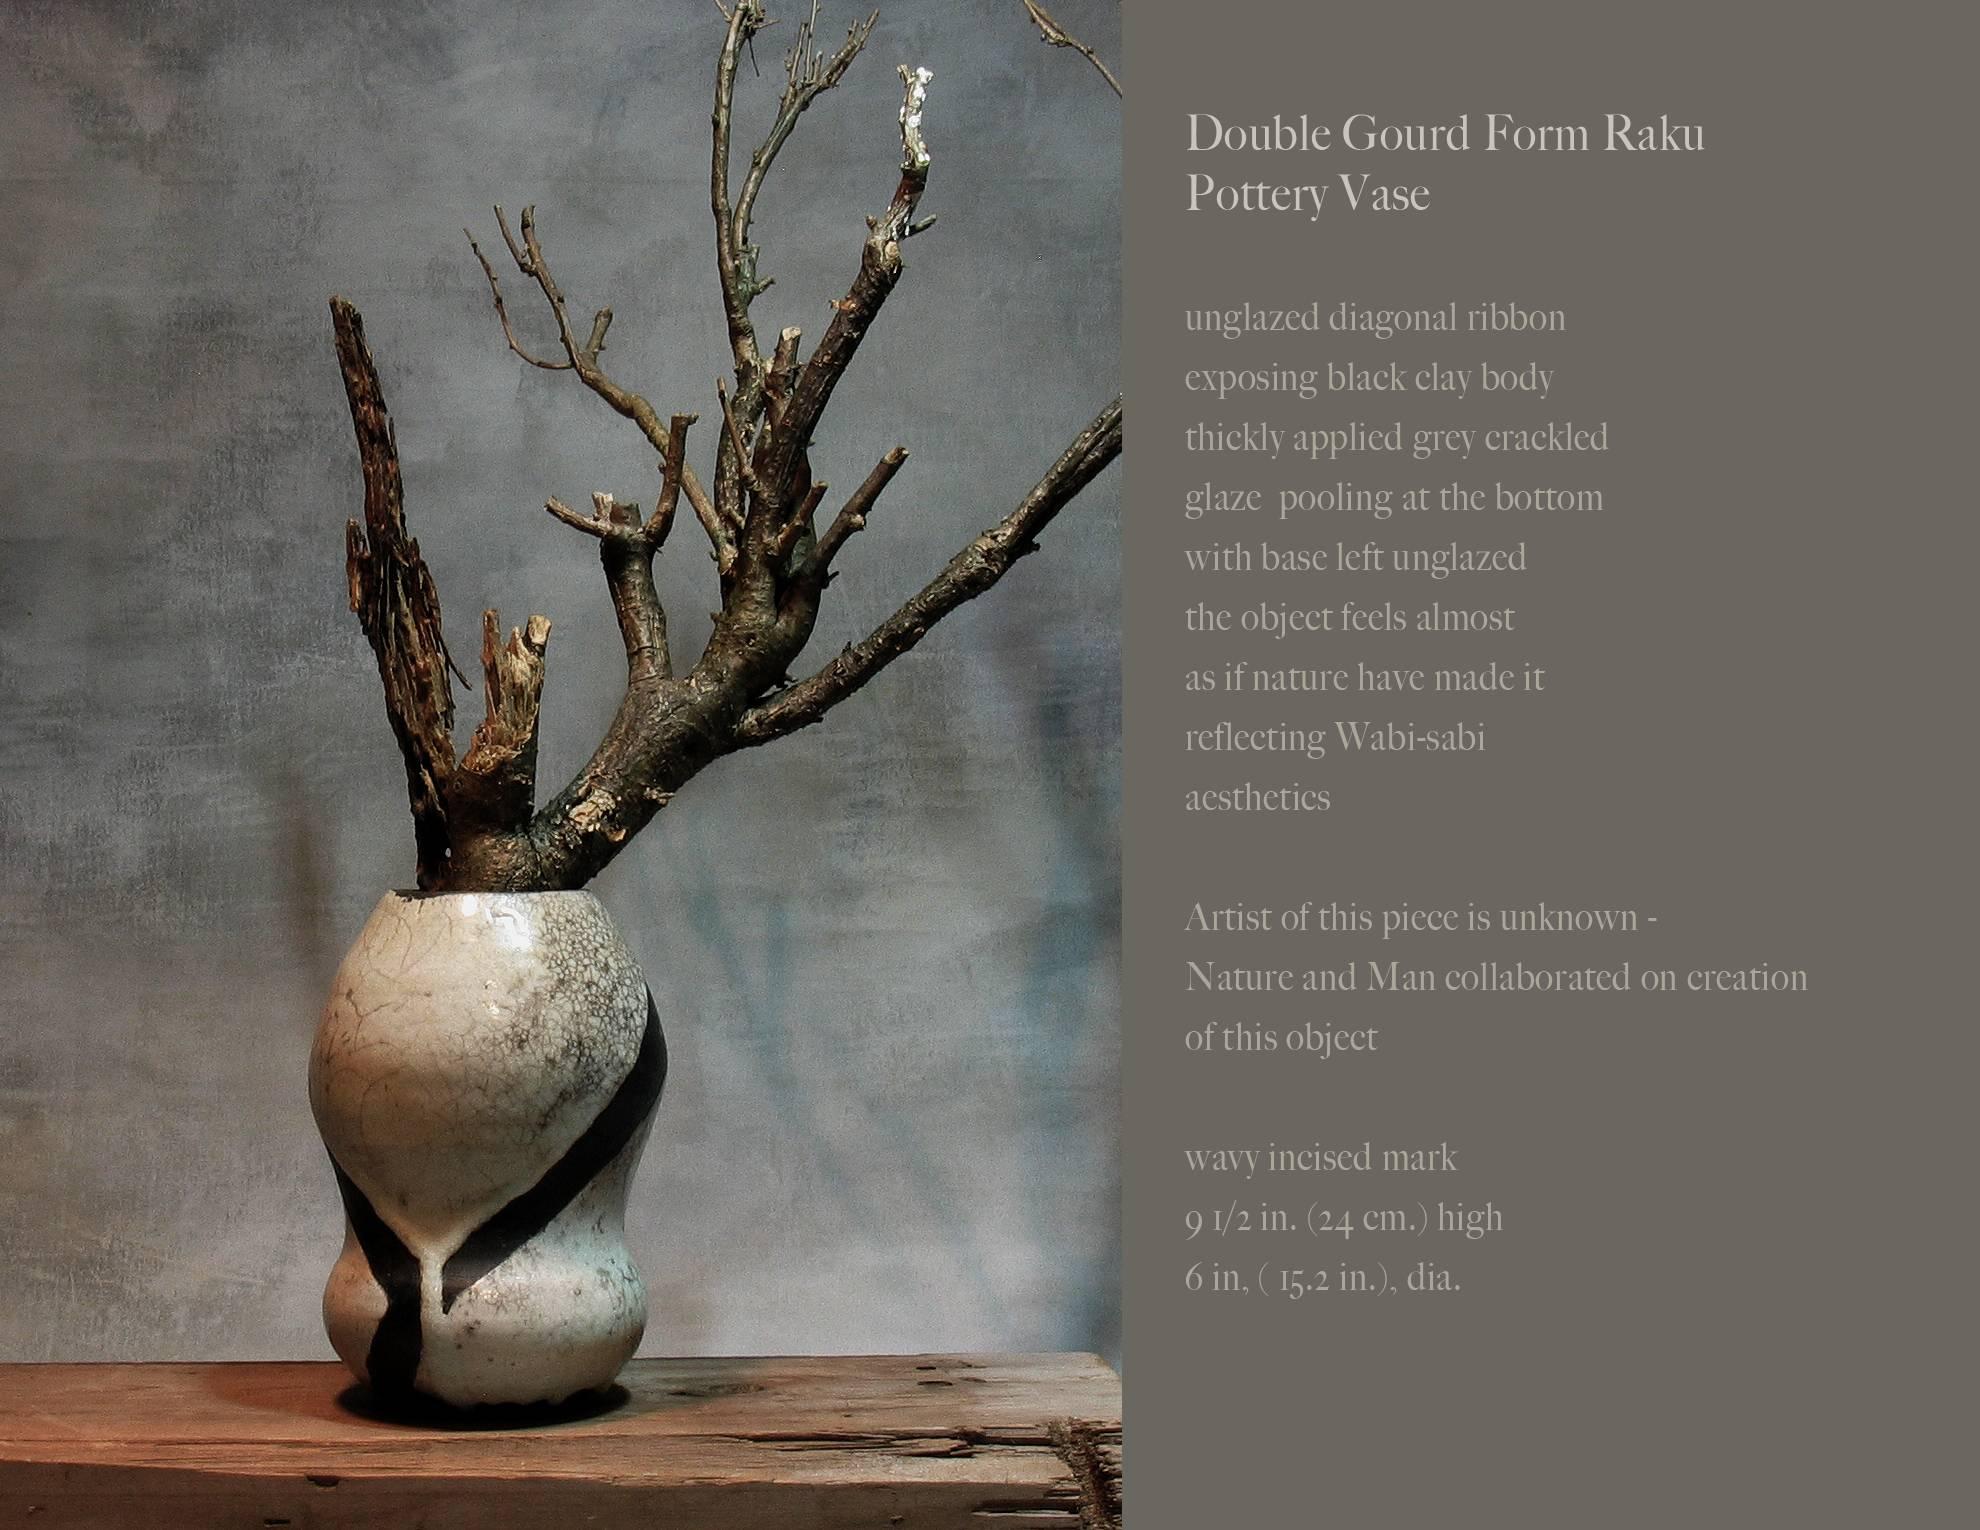 Artistic Double Gourd form Raku pottery vase, unglazed diagonal ribbon exposing black clay body thickly applied grey crackled glaze pooling at the bottom with base left unglazed the object feels almost as if nature have made it reflecting Wabi-Sabi